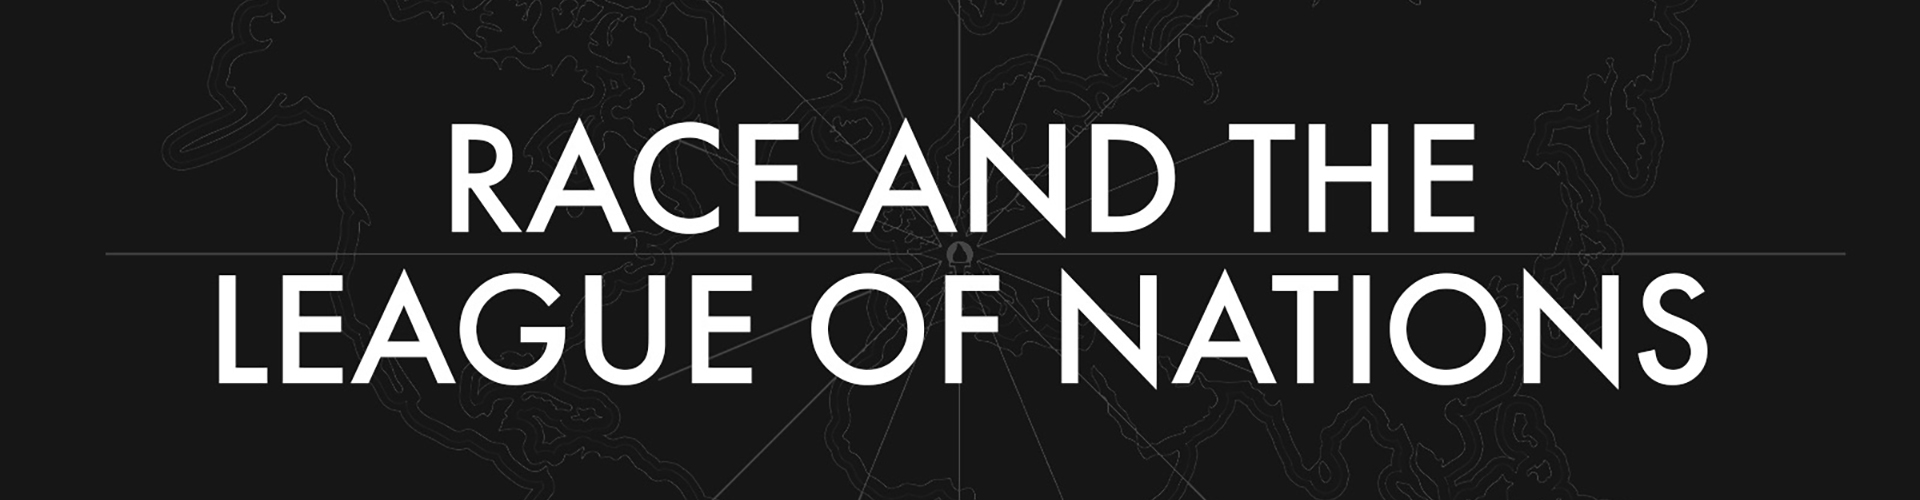 Race and the League of Nations header